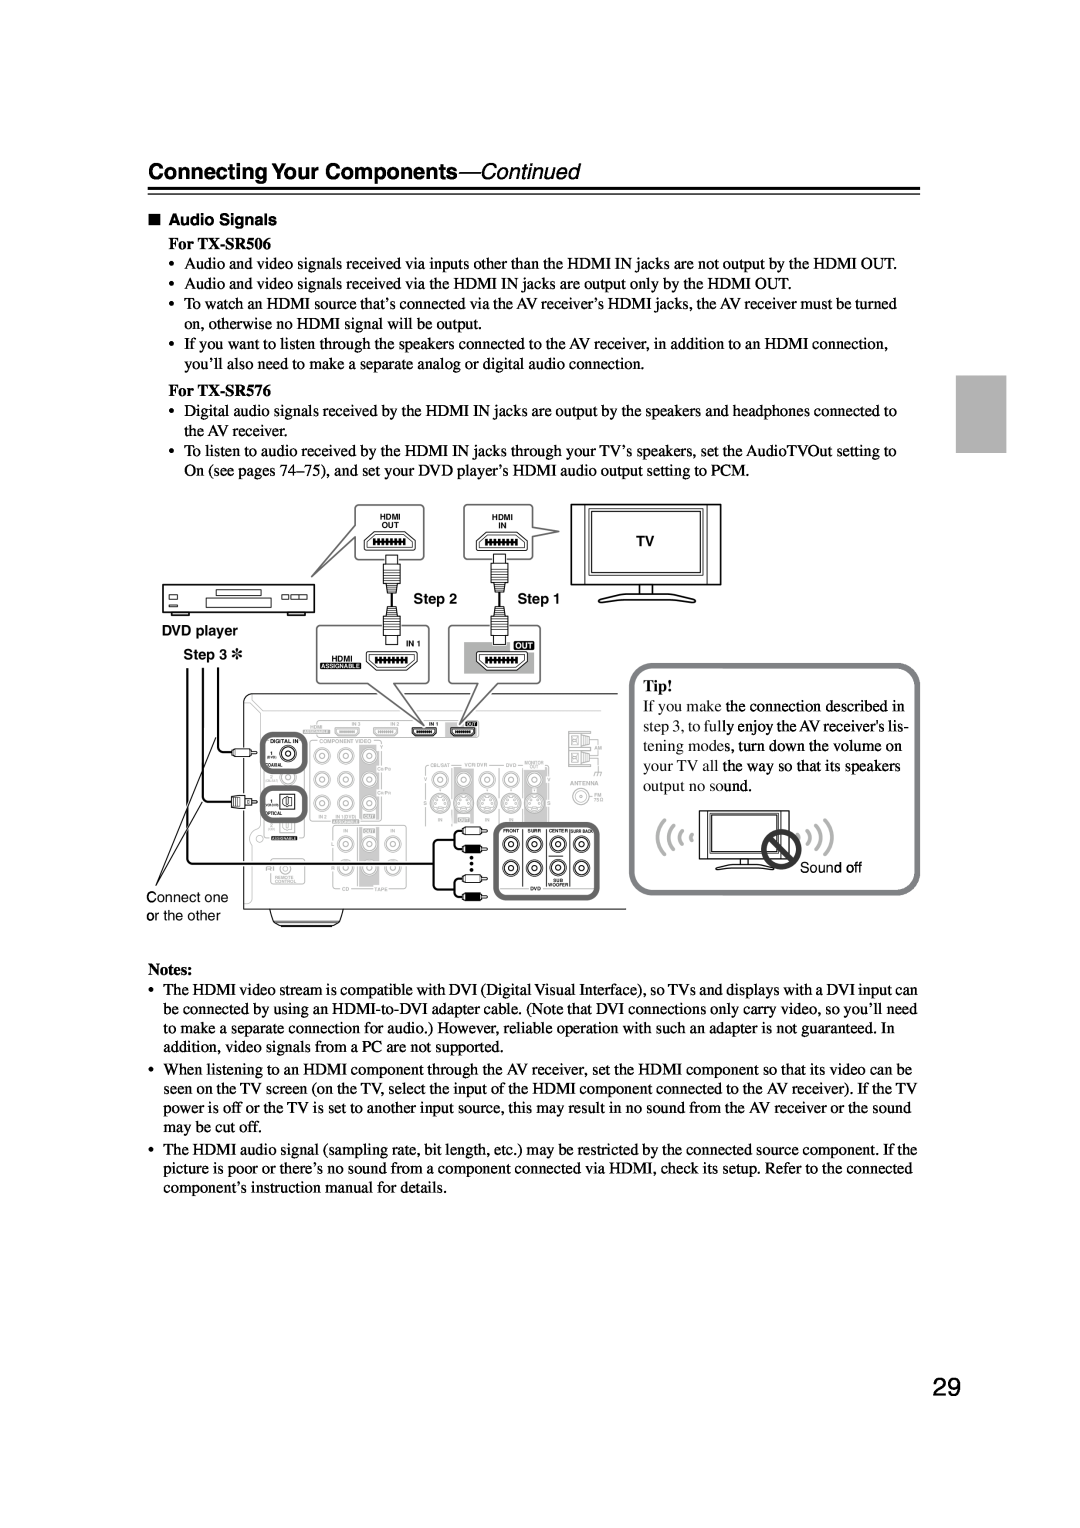 Onkyo instruction manual Connecting Your Components—Continued, Audio Signals, For TX-SR506, For TX-SR576, Notes 